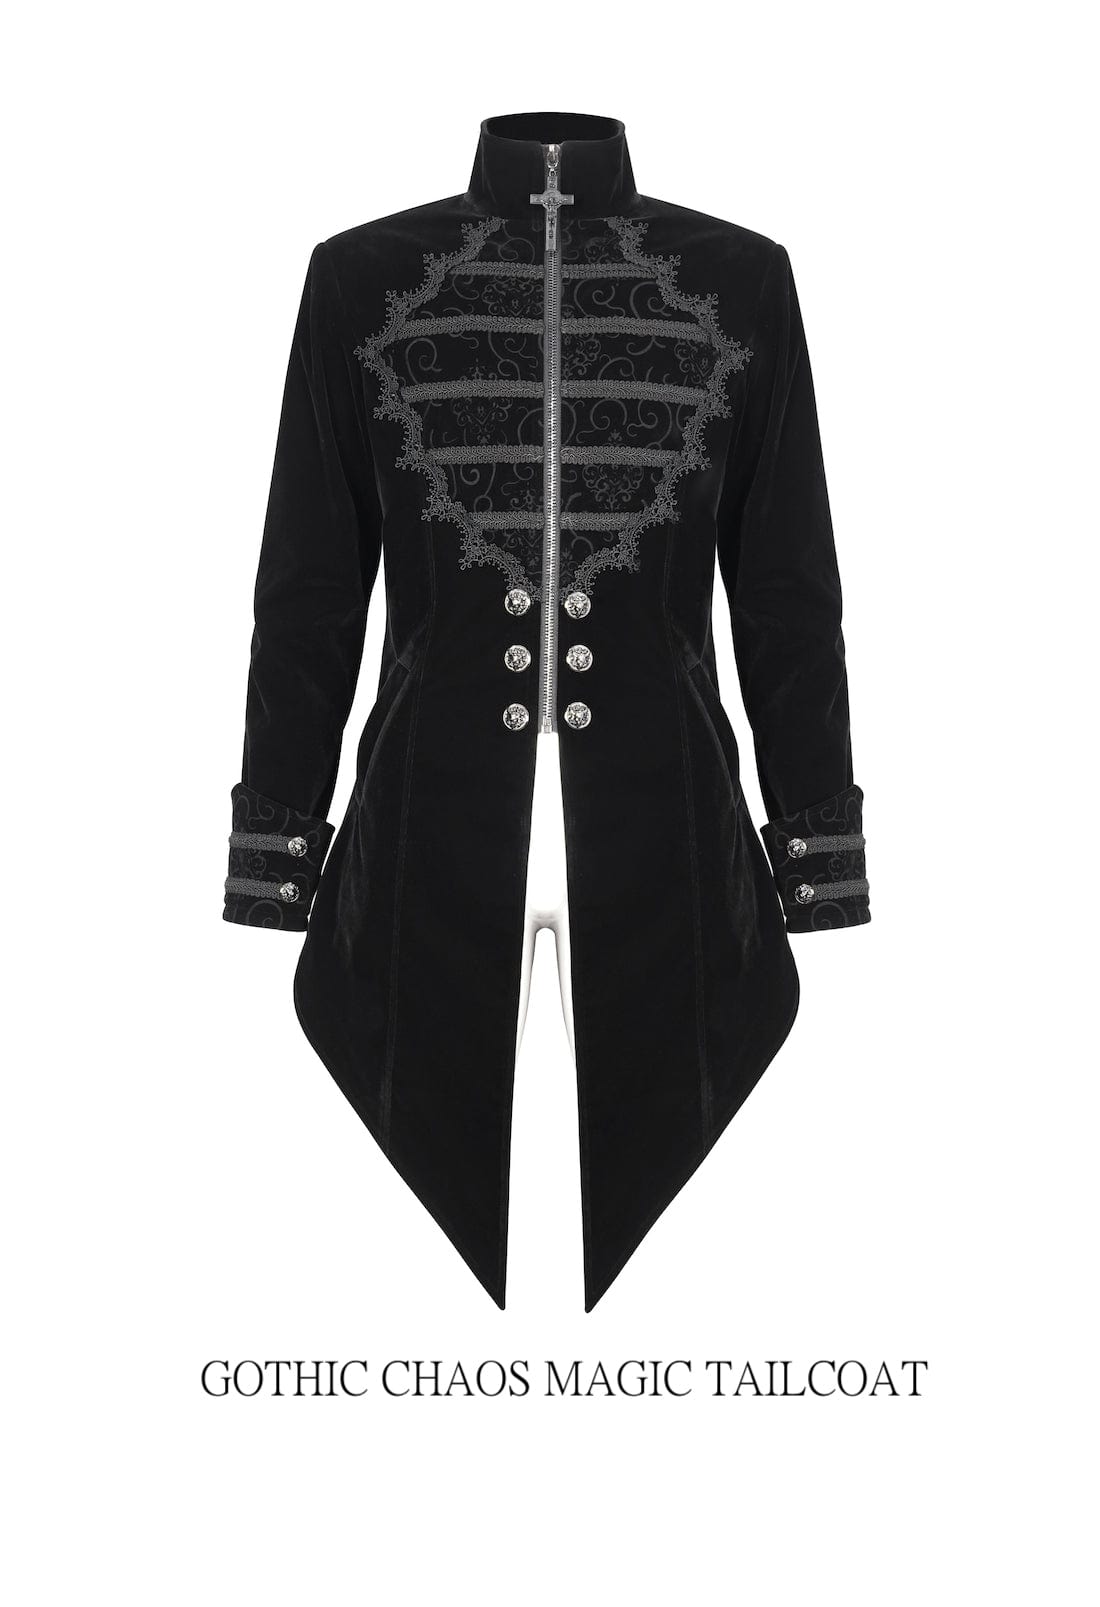 GOTHIC CHAOS MAGIC TAILCOAT IN BLACK VELVET WITH STRONG TAILORING AND ORNATE BRAID AND BUTTON DETAILS FROM DEVIL FASHION AT GALLERY SERPENTINE